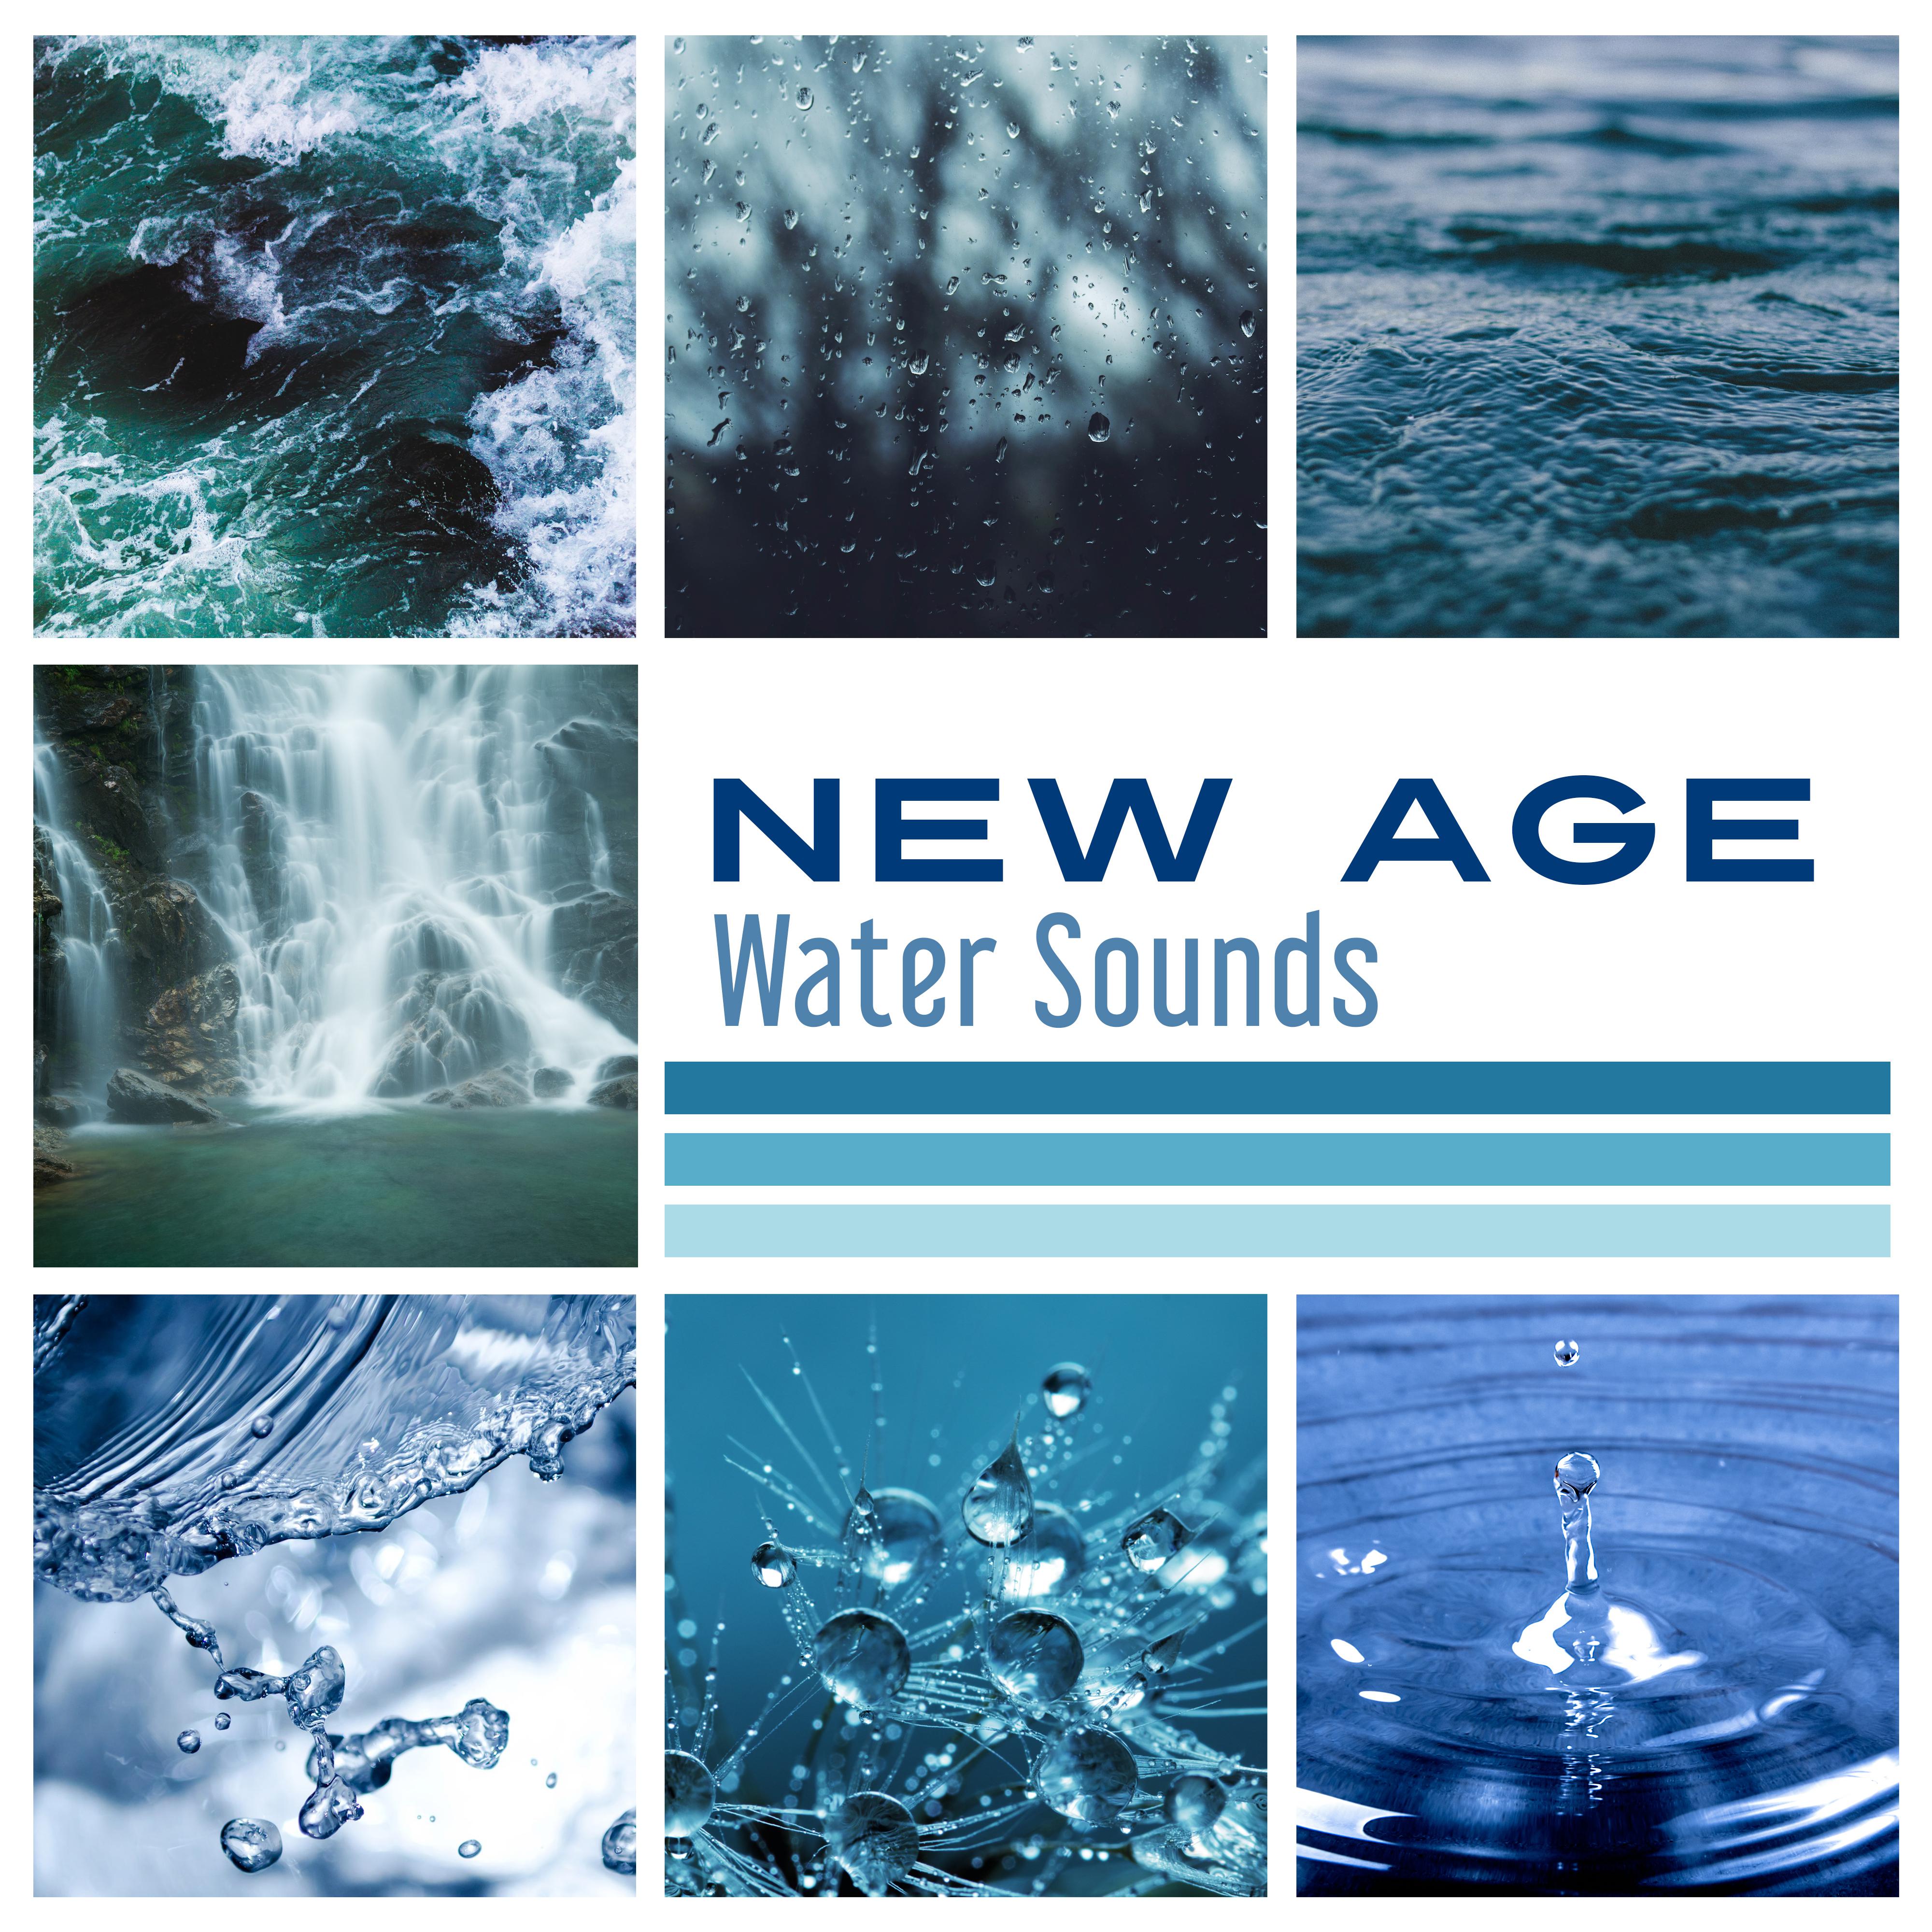 New Age: Water Sounds – Calming Sounds of Water, Healing Therapy, Waves of Calmness, Stress Free